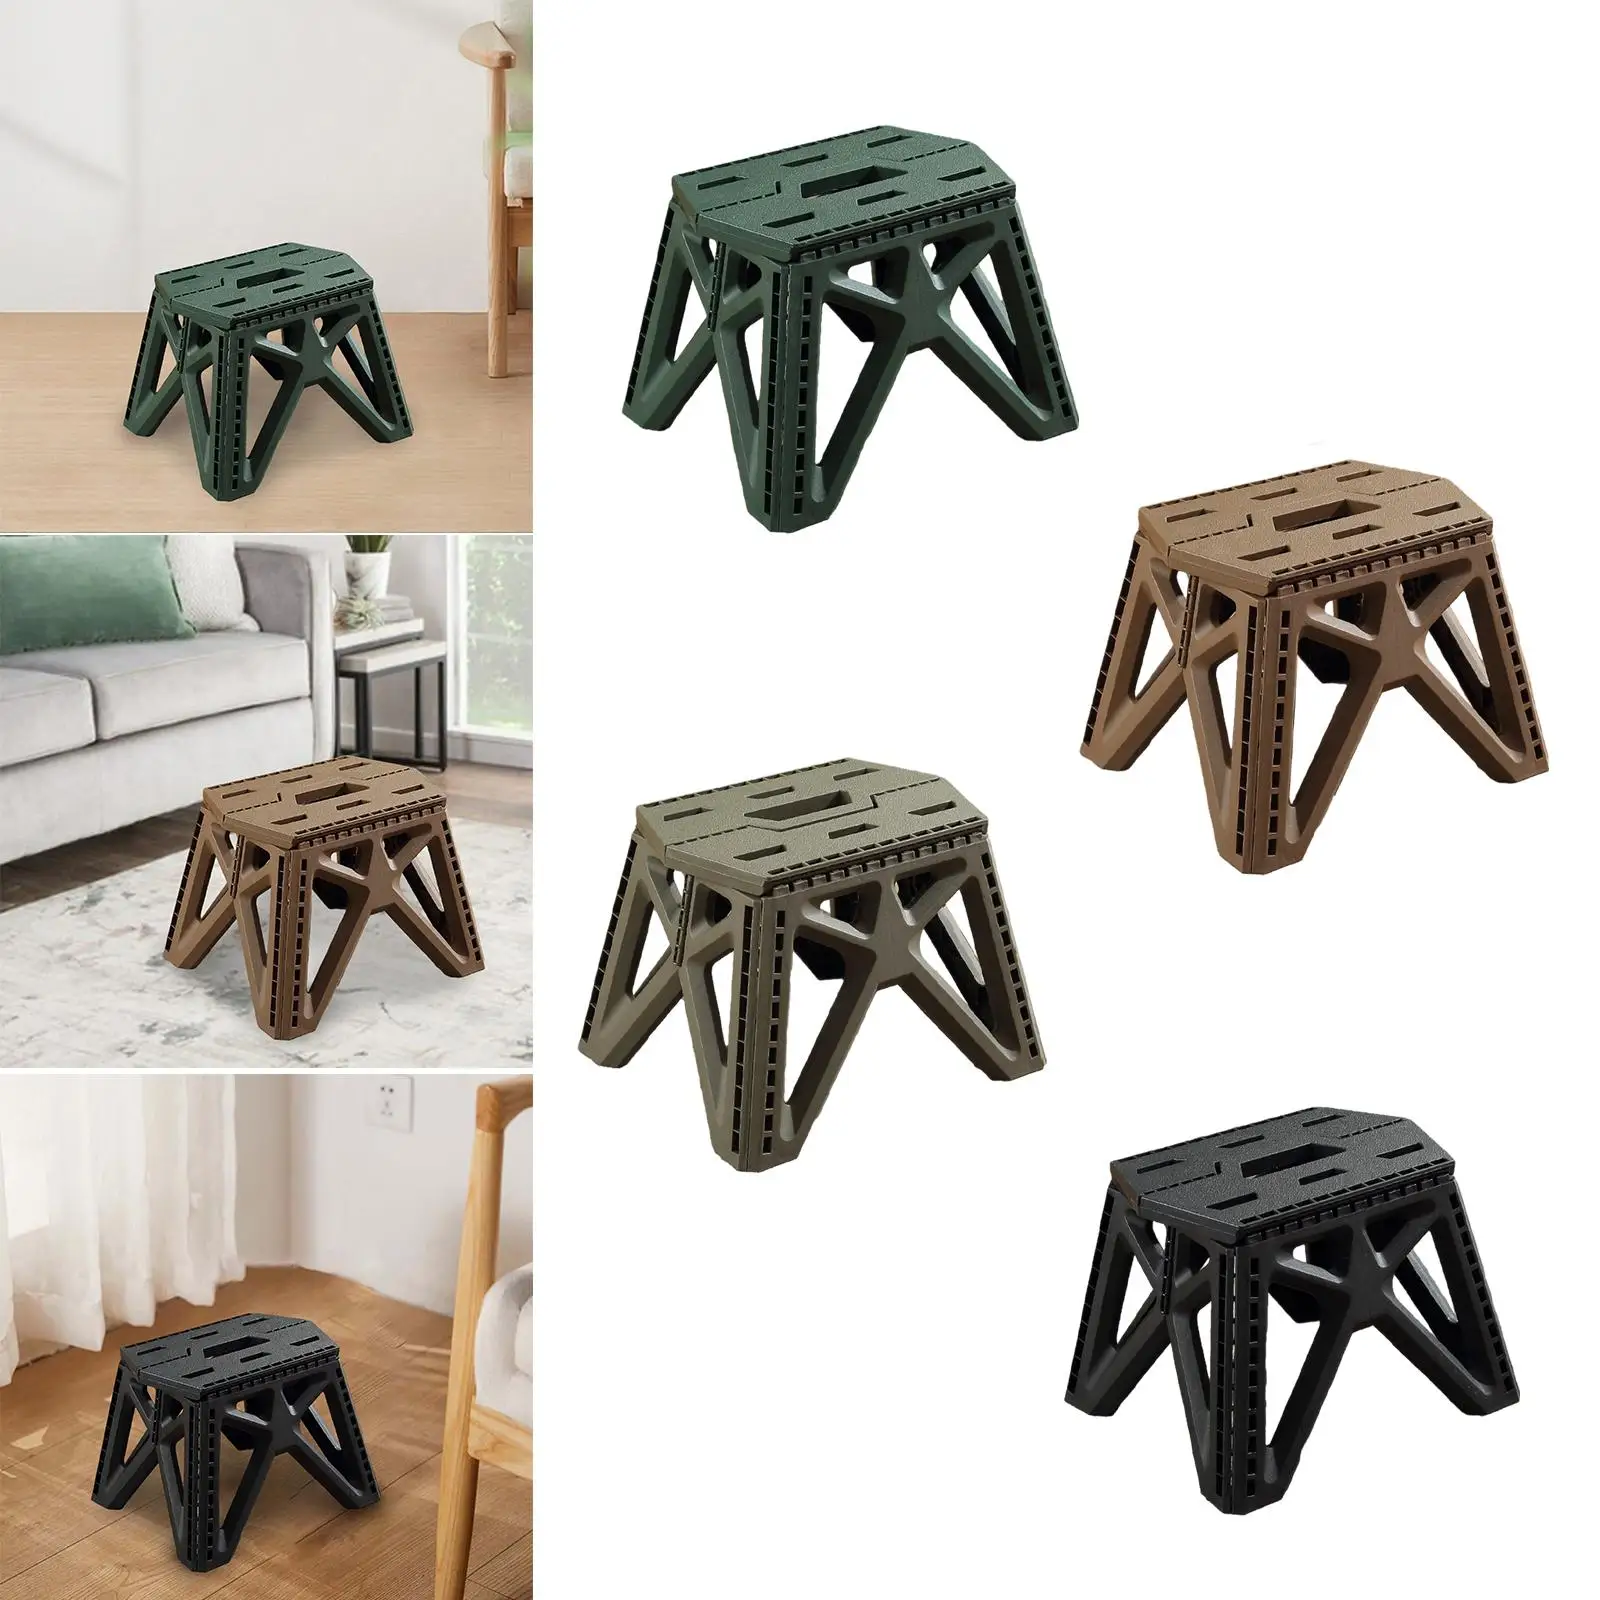 Folding Camping Stool Compact Collapsible Ultralight Outdoor Foldable Stool Camping Chair for Picnic Backyard Travel Hiking